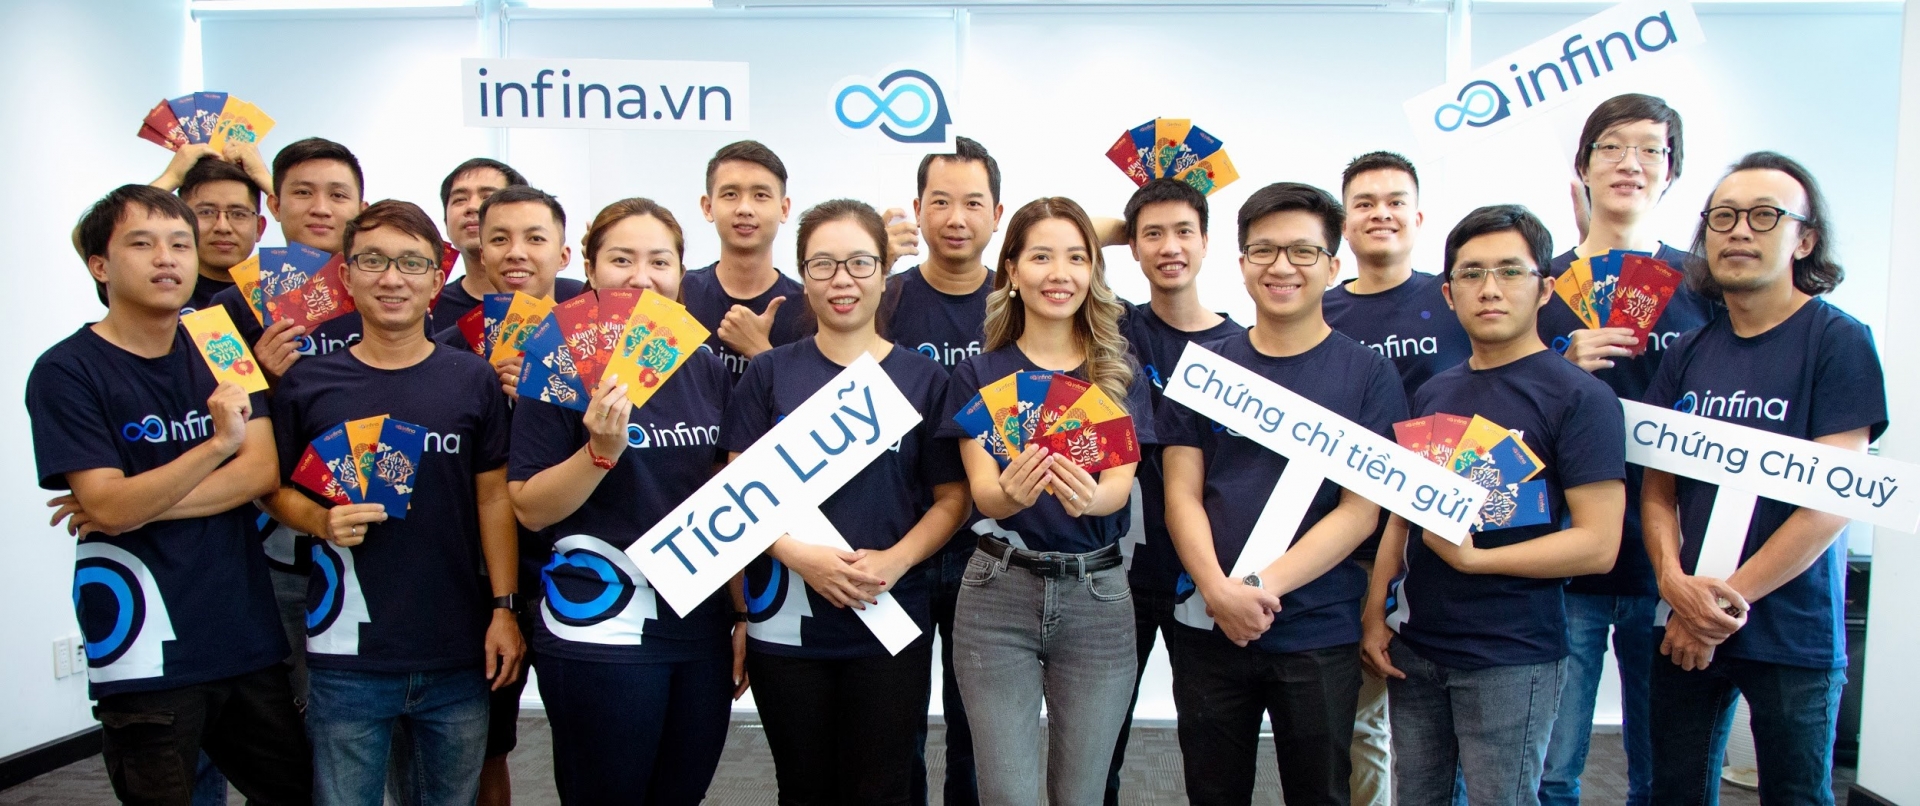 Vietnamese investment app Infina closes $2 million seed round